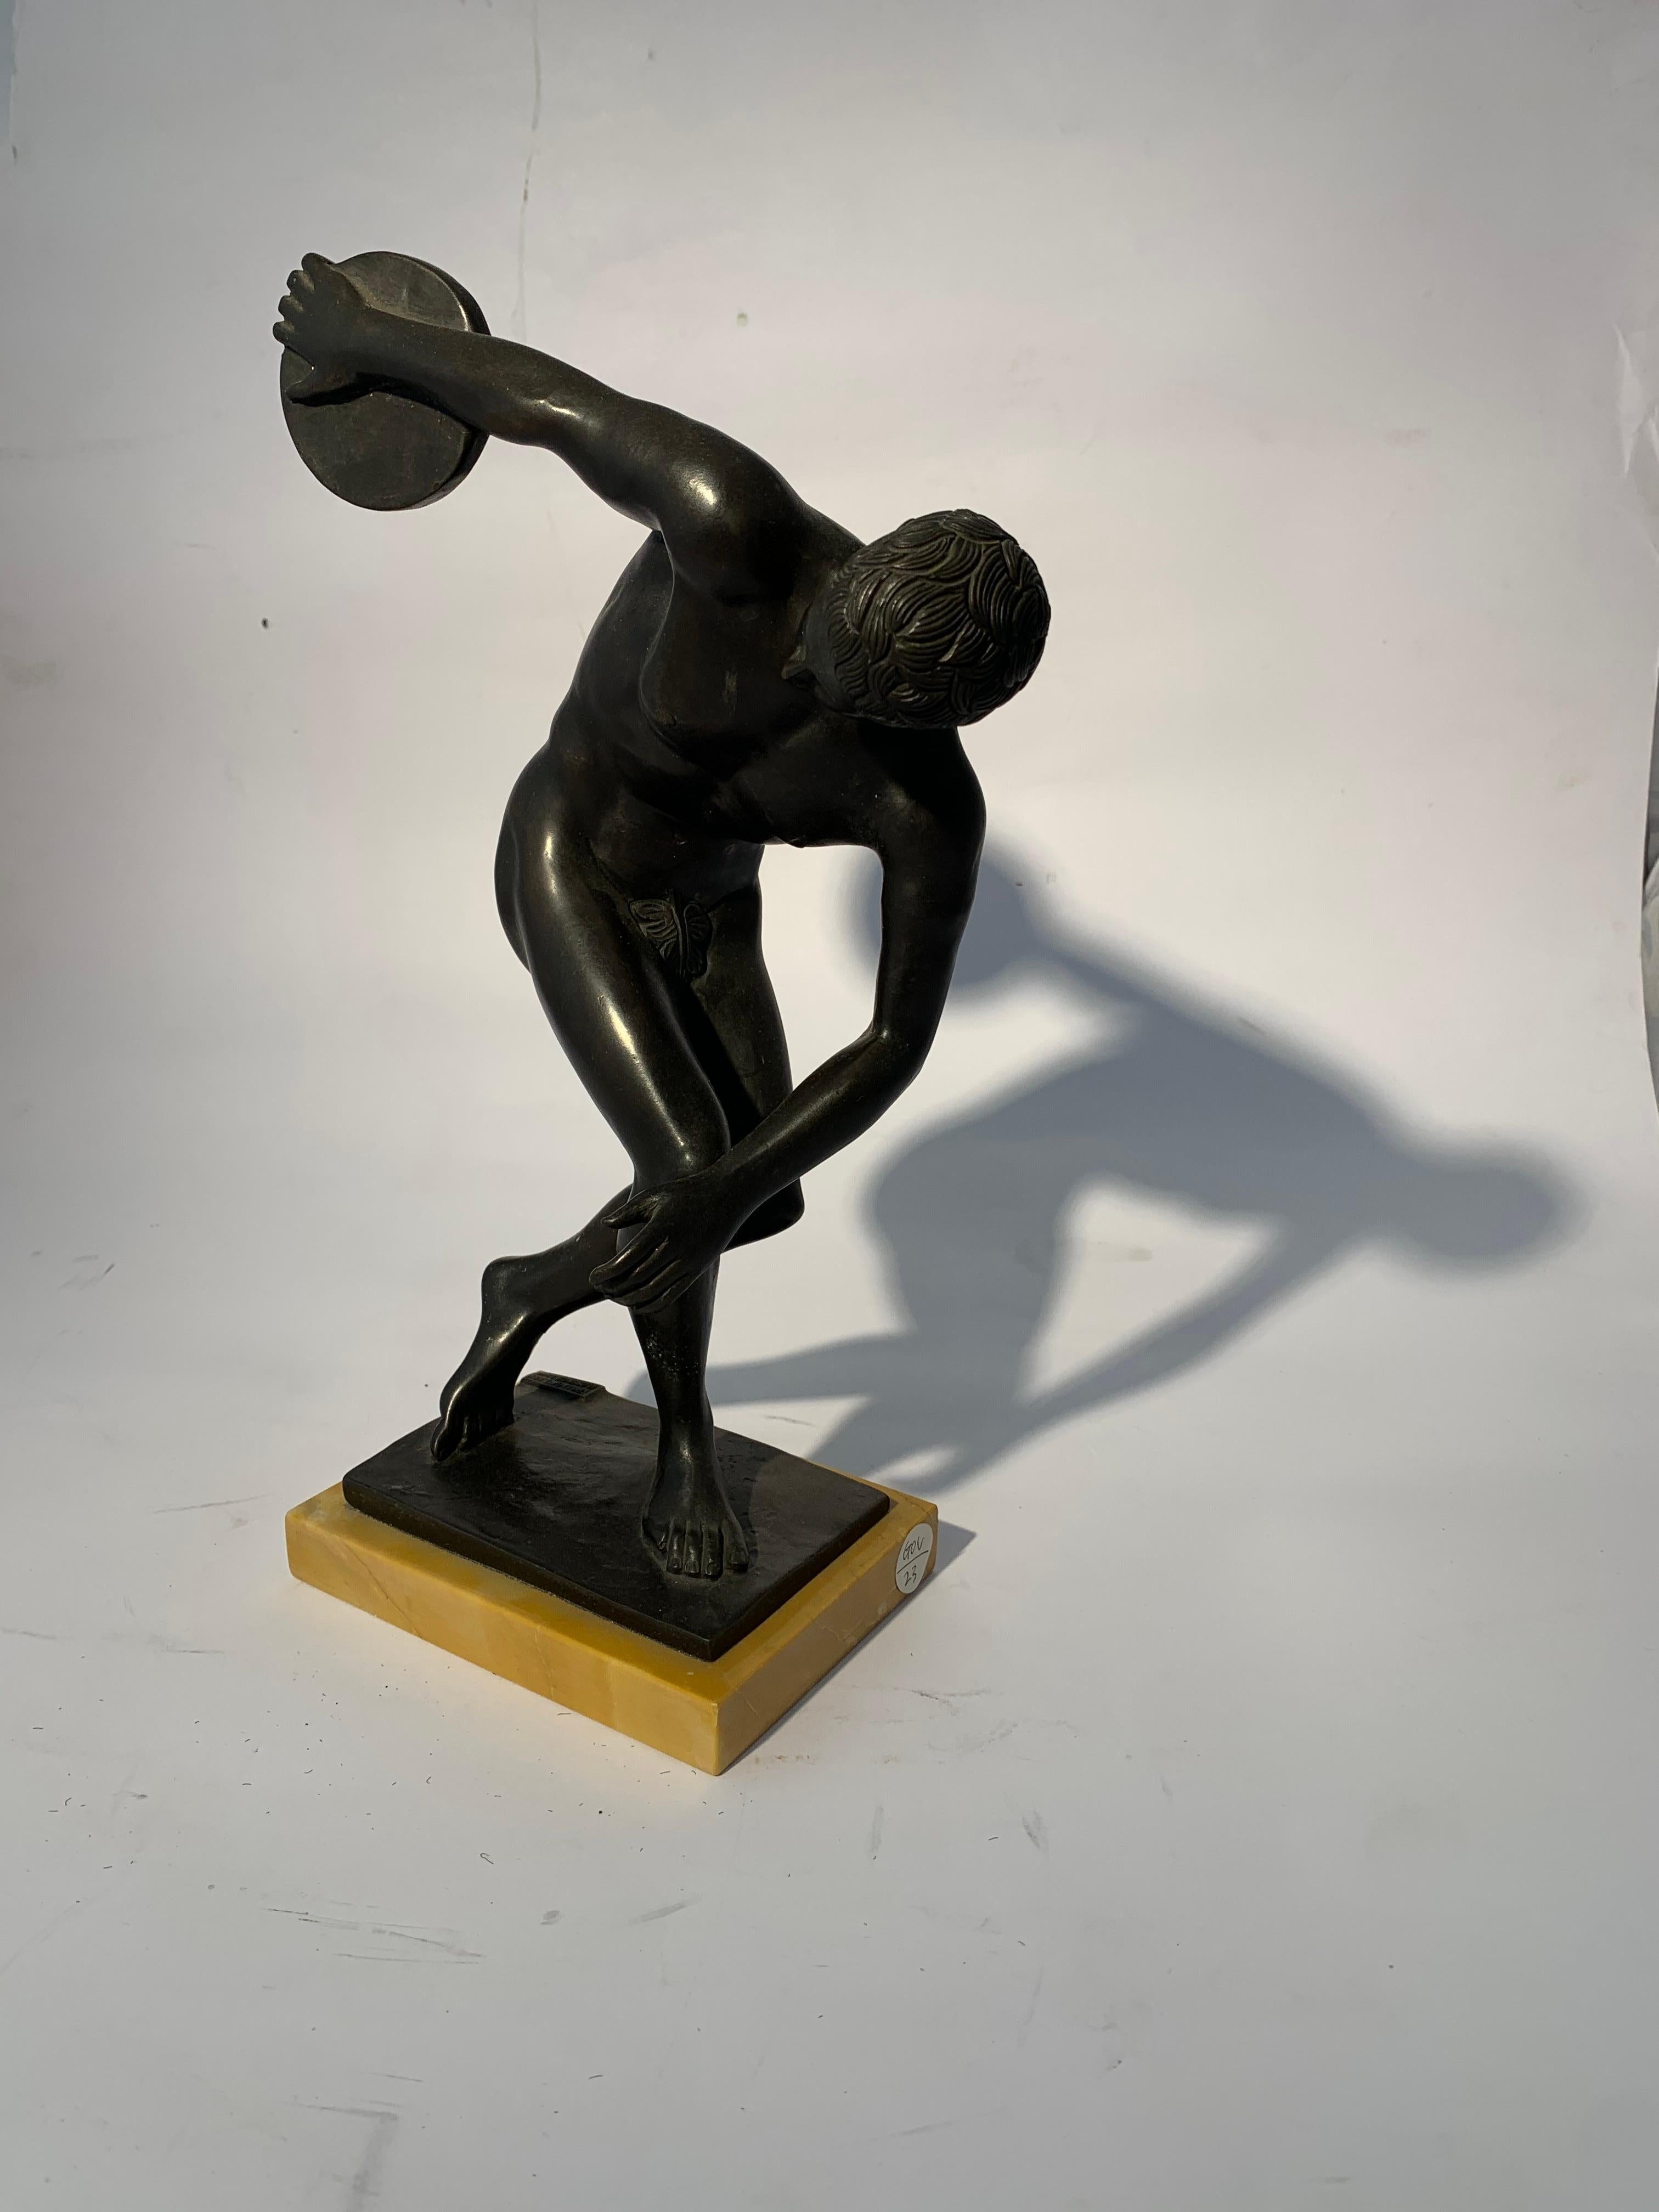 Beautiful bronze sculpture depicting Discus thrower made with the lost wax technique. The base is in Siena yellow marble.
Italian manufacture from the second half of the 19th century.